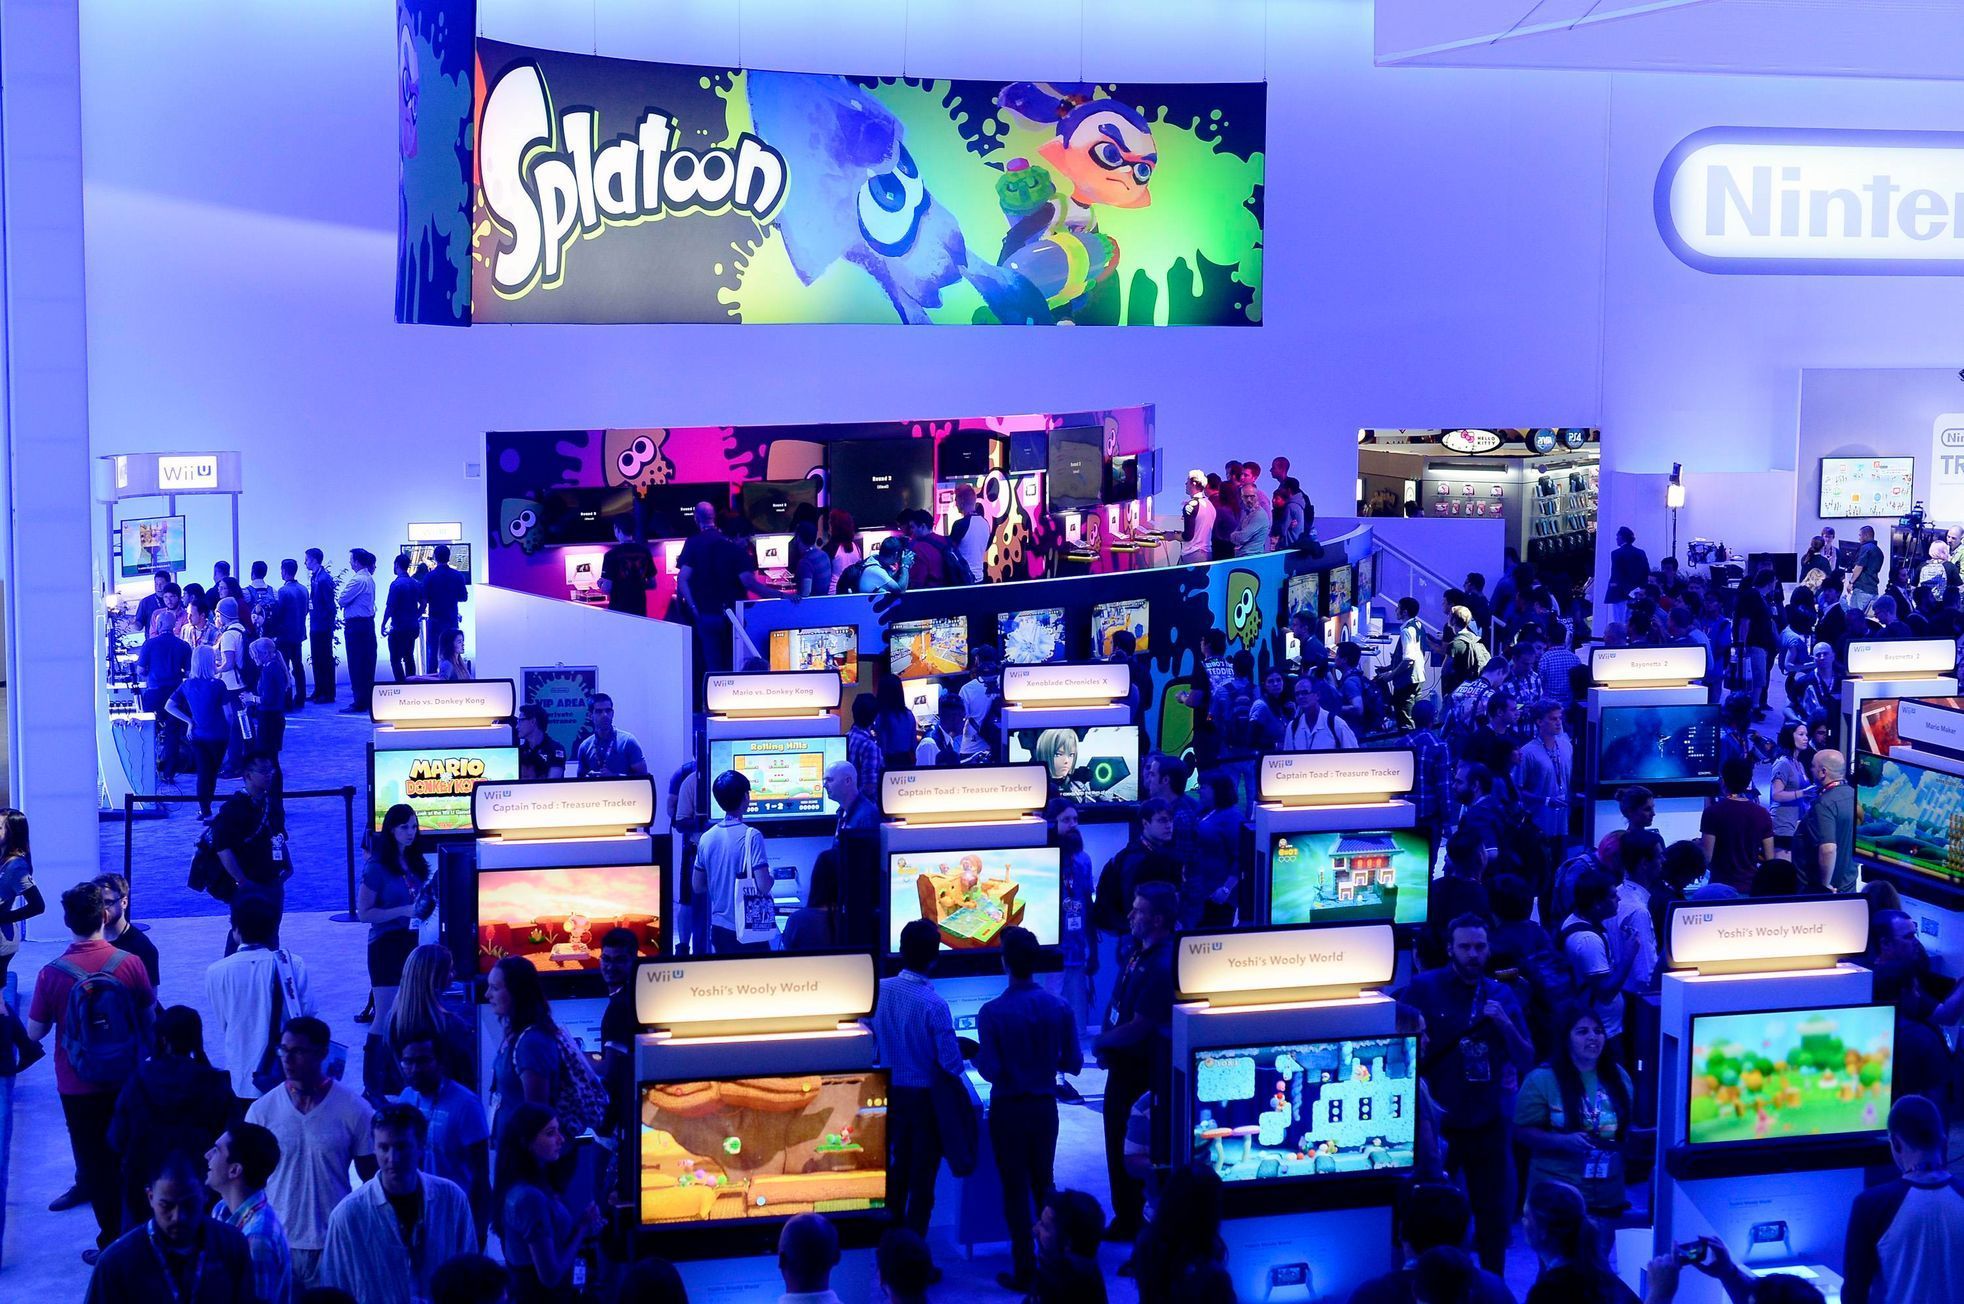 Attendees play video games in the Nintendo booth at the 2014 Electronic Entertainment Expo, known as E3, in Los Angeles